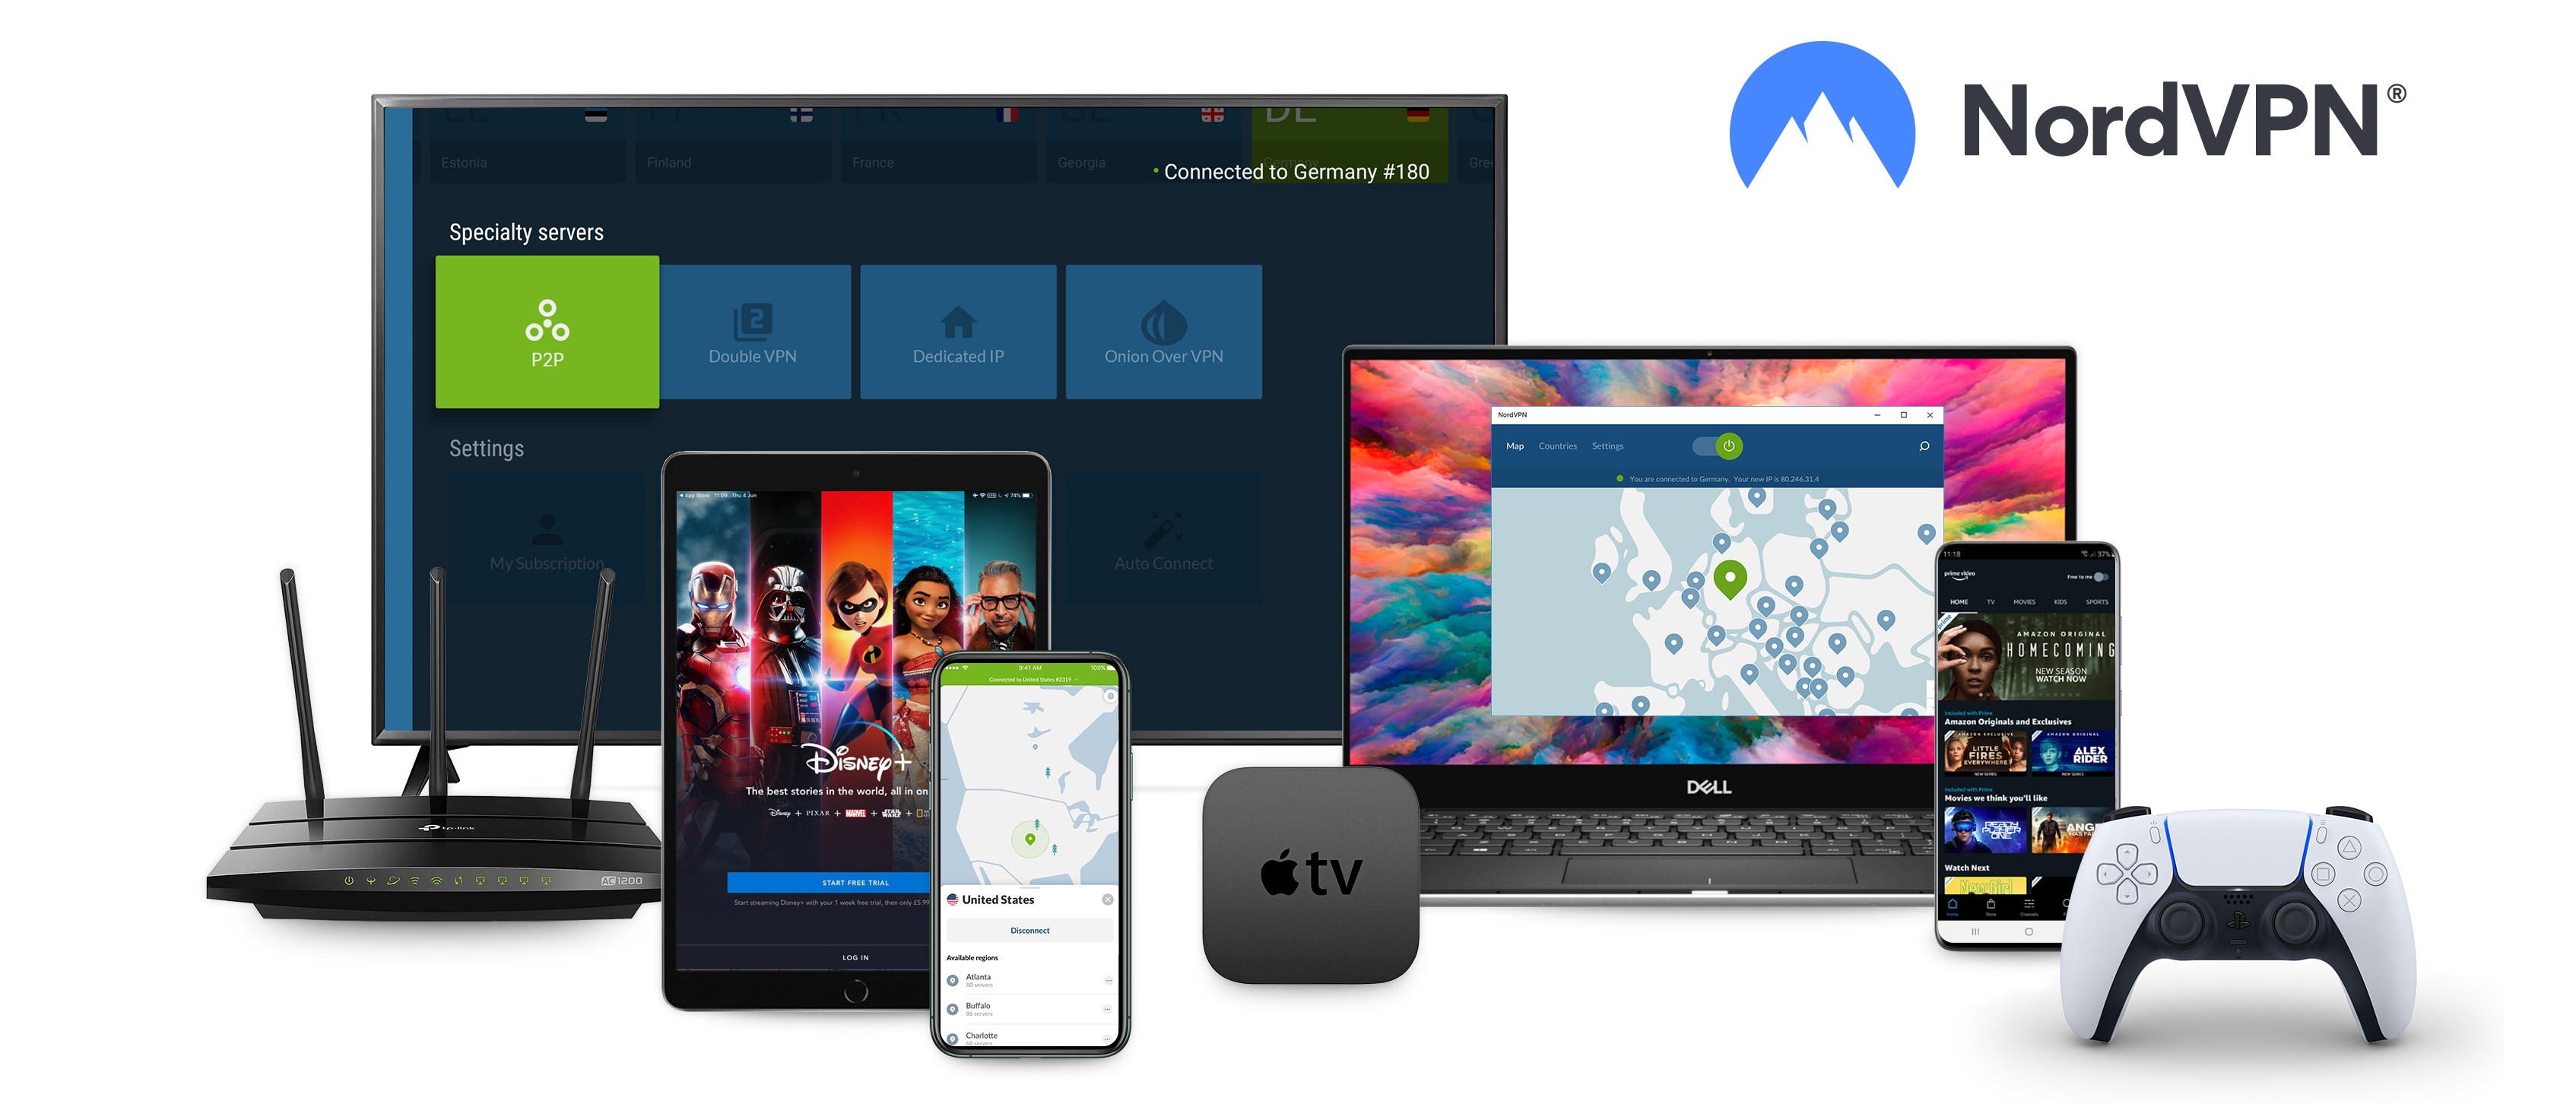 NordVPN: what is it and how good is it? In-depth review | TechRadar